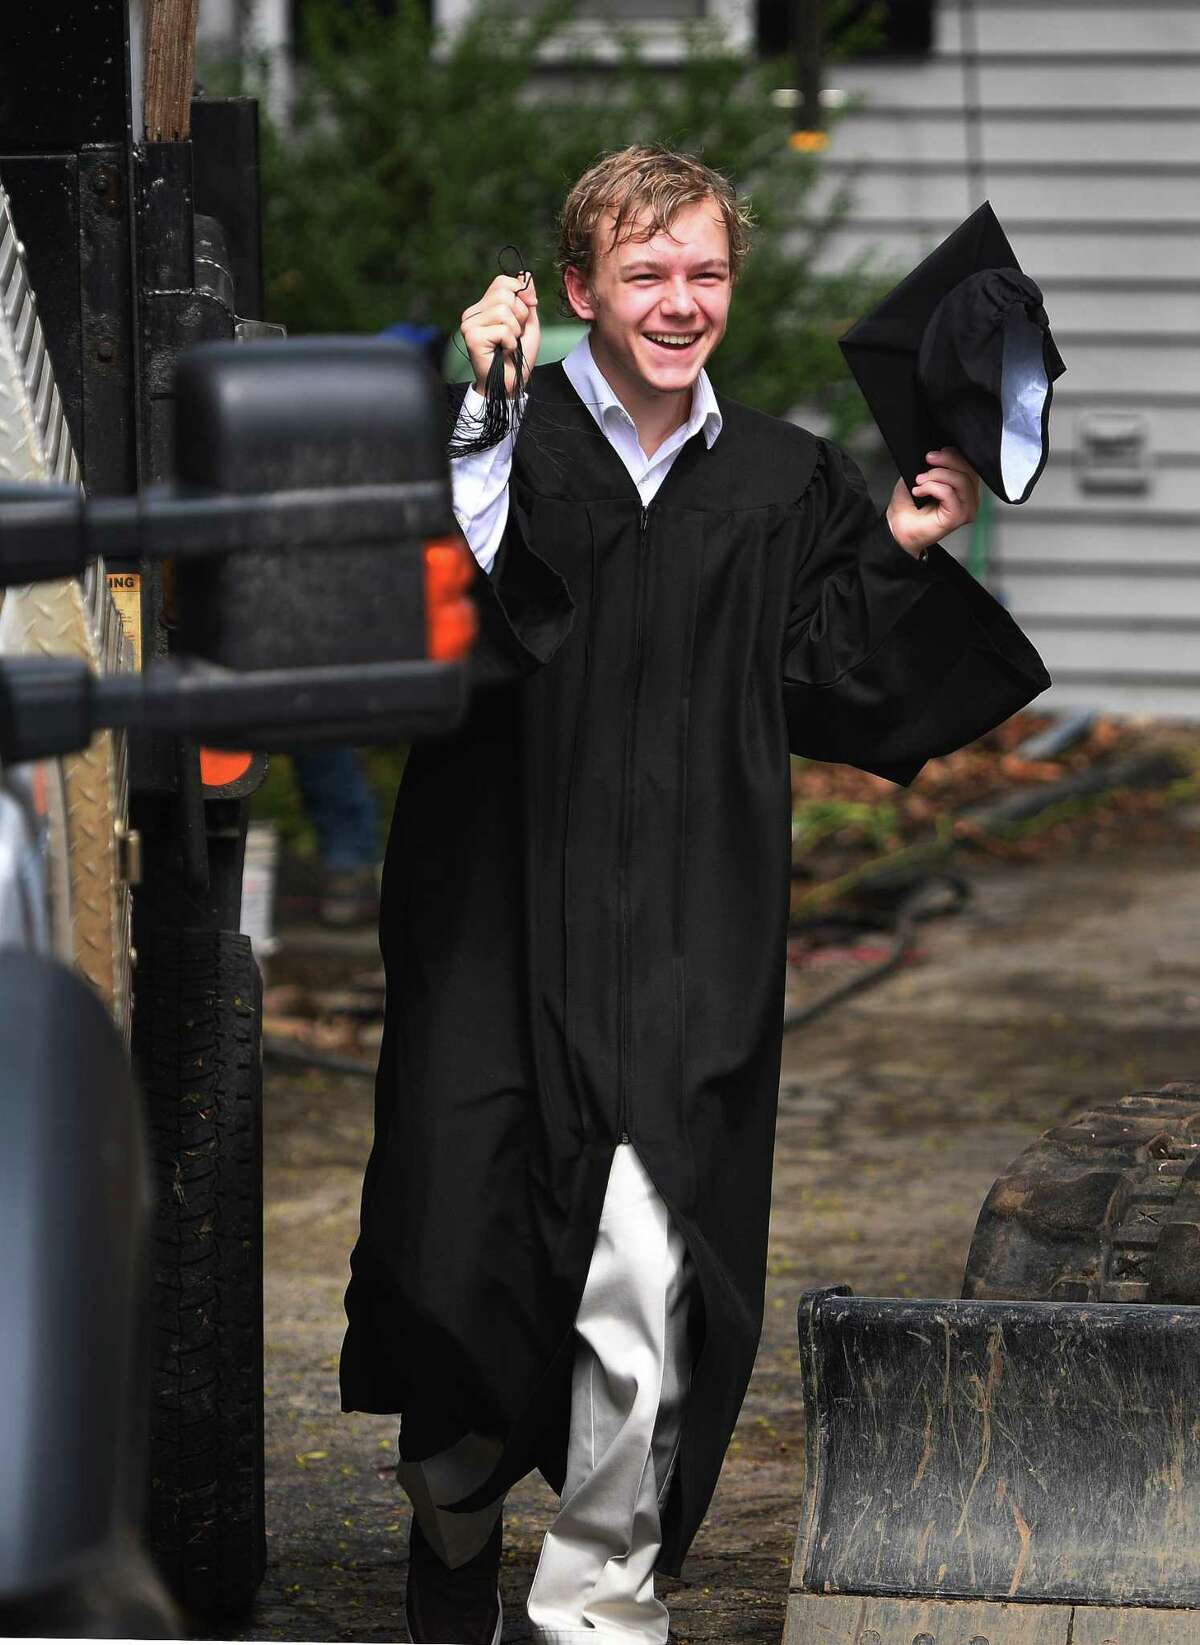 P-Tech program graduate Landon Heatley greets program staffers as he comes out to take cap and gown photos outside his home in Norwalk, Conn. on Sunday, May 3, 2020. Staffers in a car caravan visited each of the program graduates for photos on Sunday.